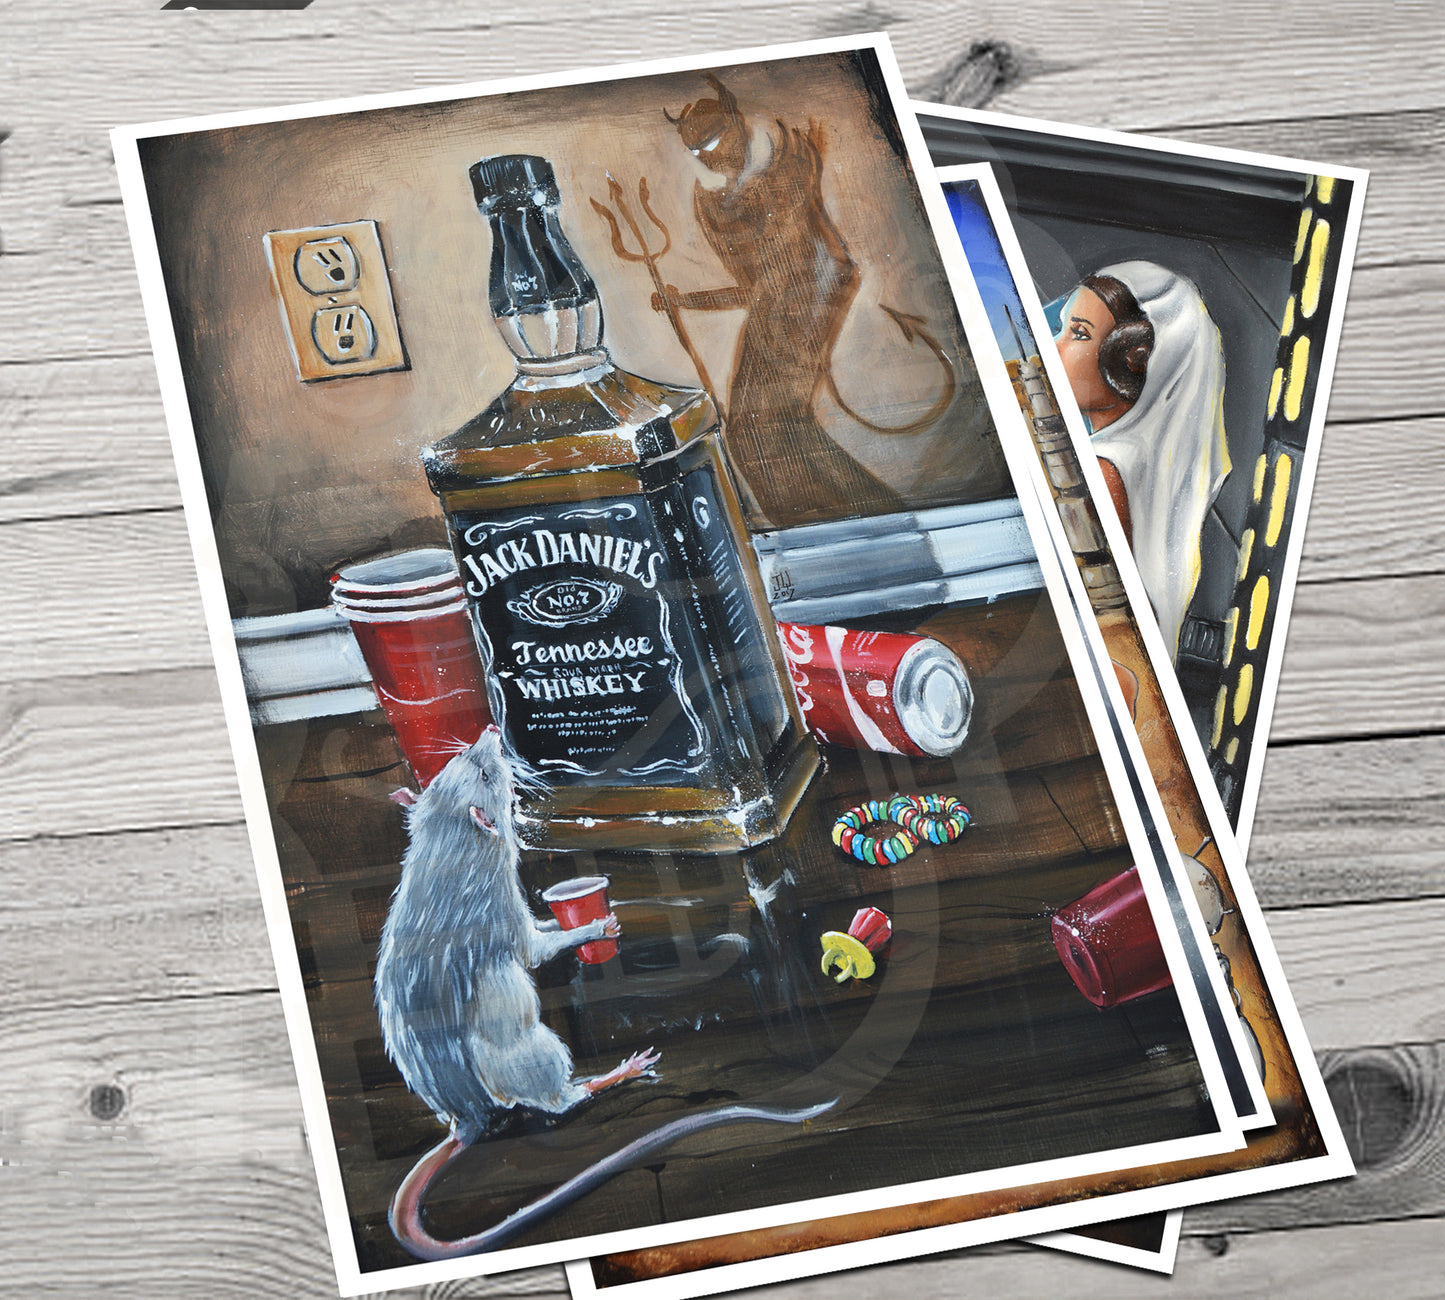 JEREMY WORST Devil's Choice Jack Whiskey Poster Canvas Wall alcohol Art Painting Decanter Bottle Barrel Bourbon nsfw xvideo cocktail wine